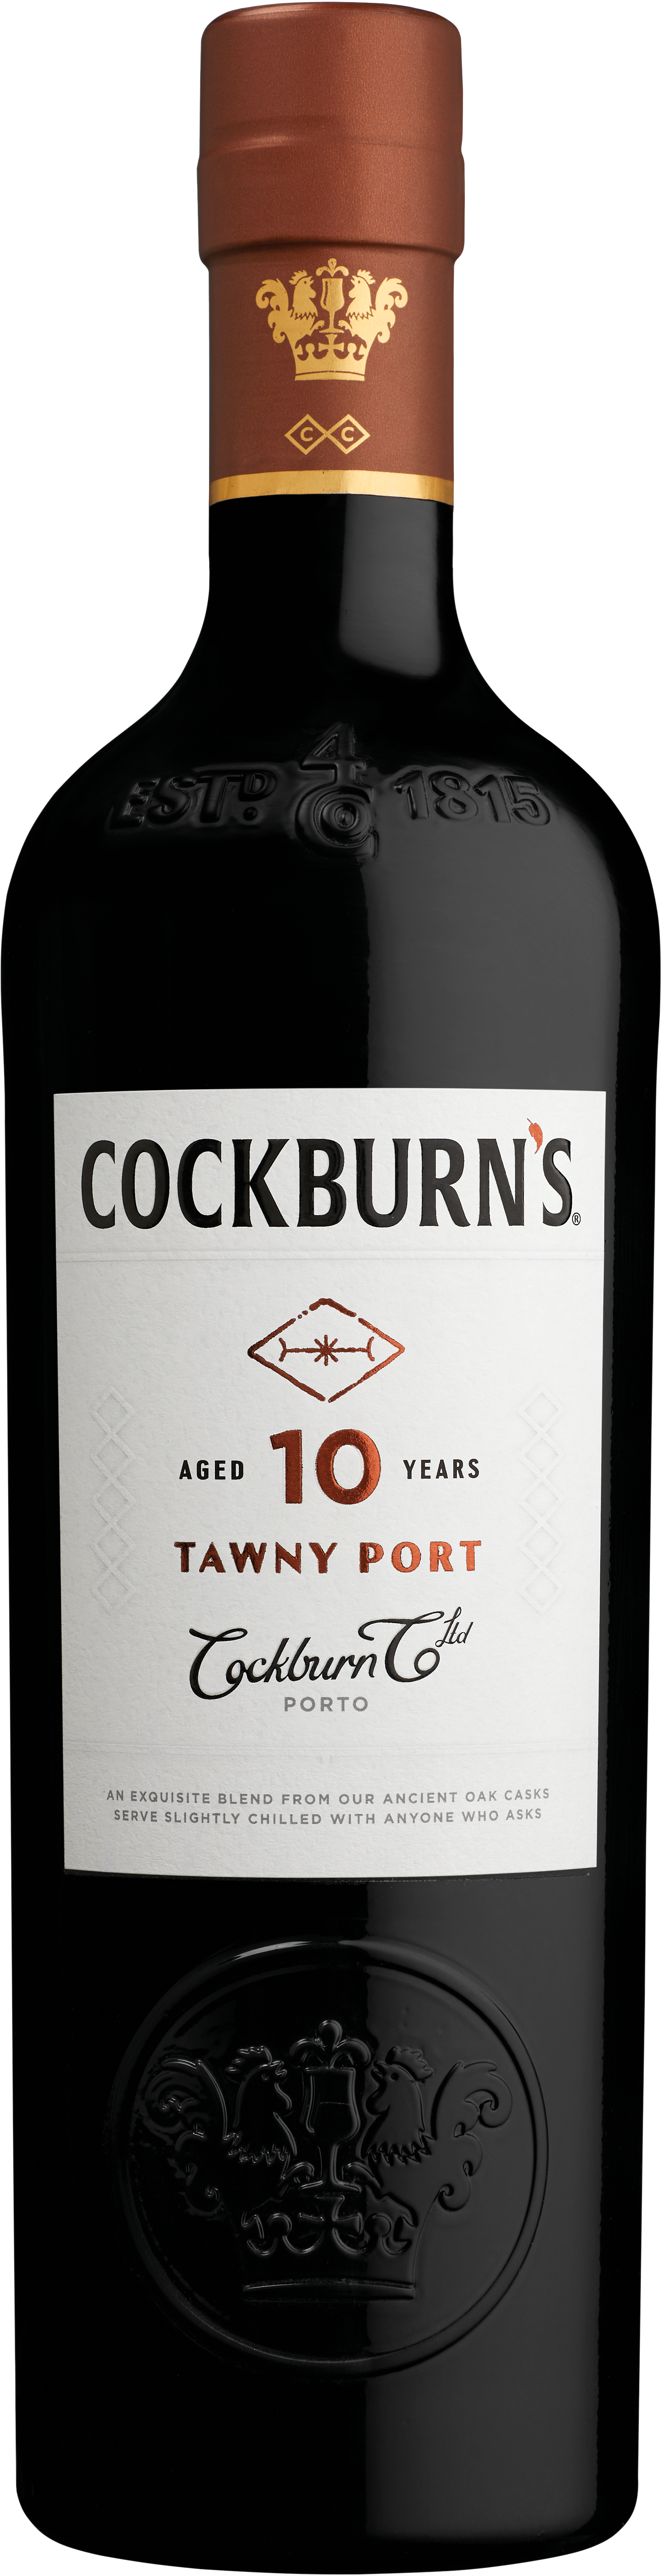 Product Image for COCKBURN'S 10 YEAR OLD TAWNY PORT